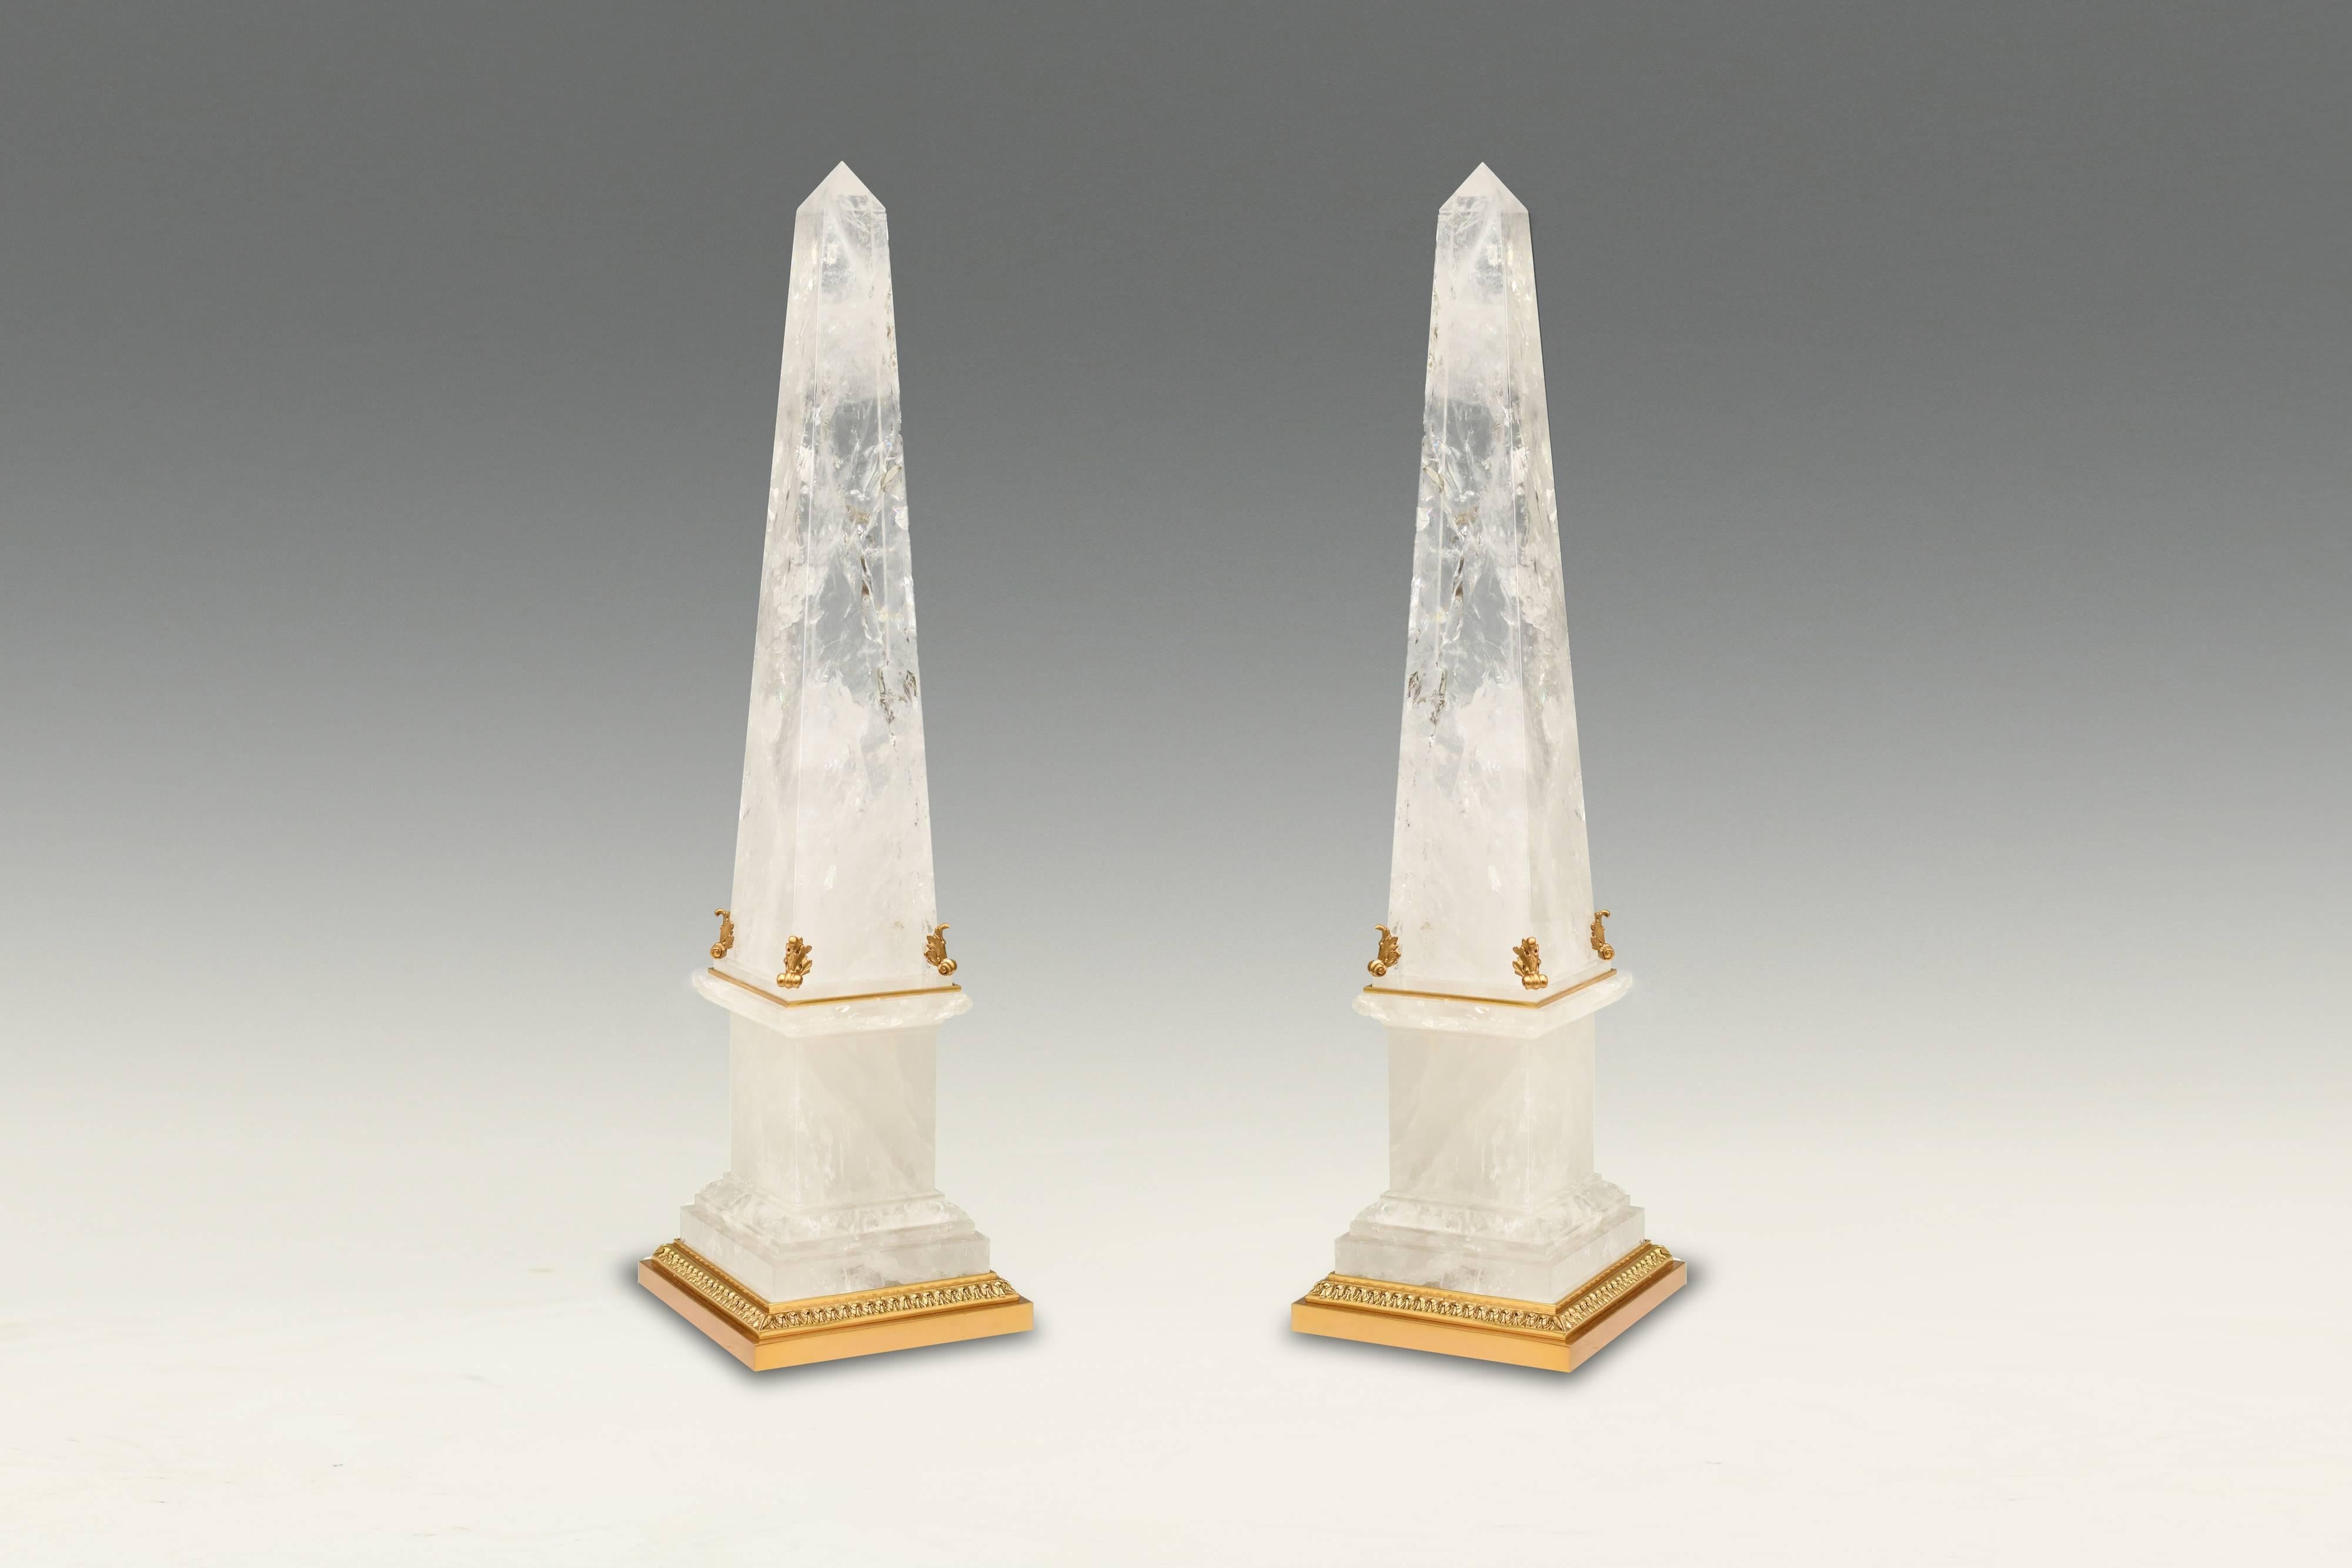 A pair of rock crystal obelisks with fine carved metal decoration, created by Phoenix Gallery, NYC.
